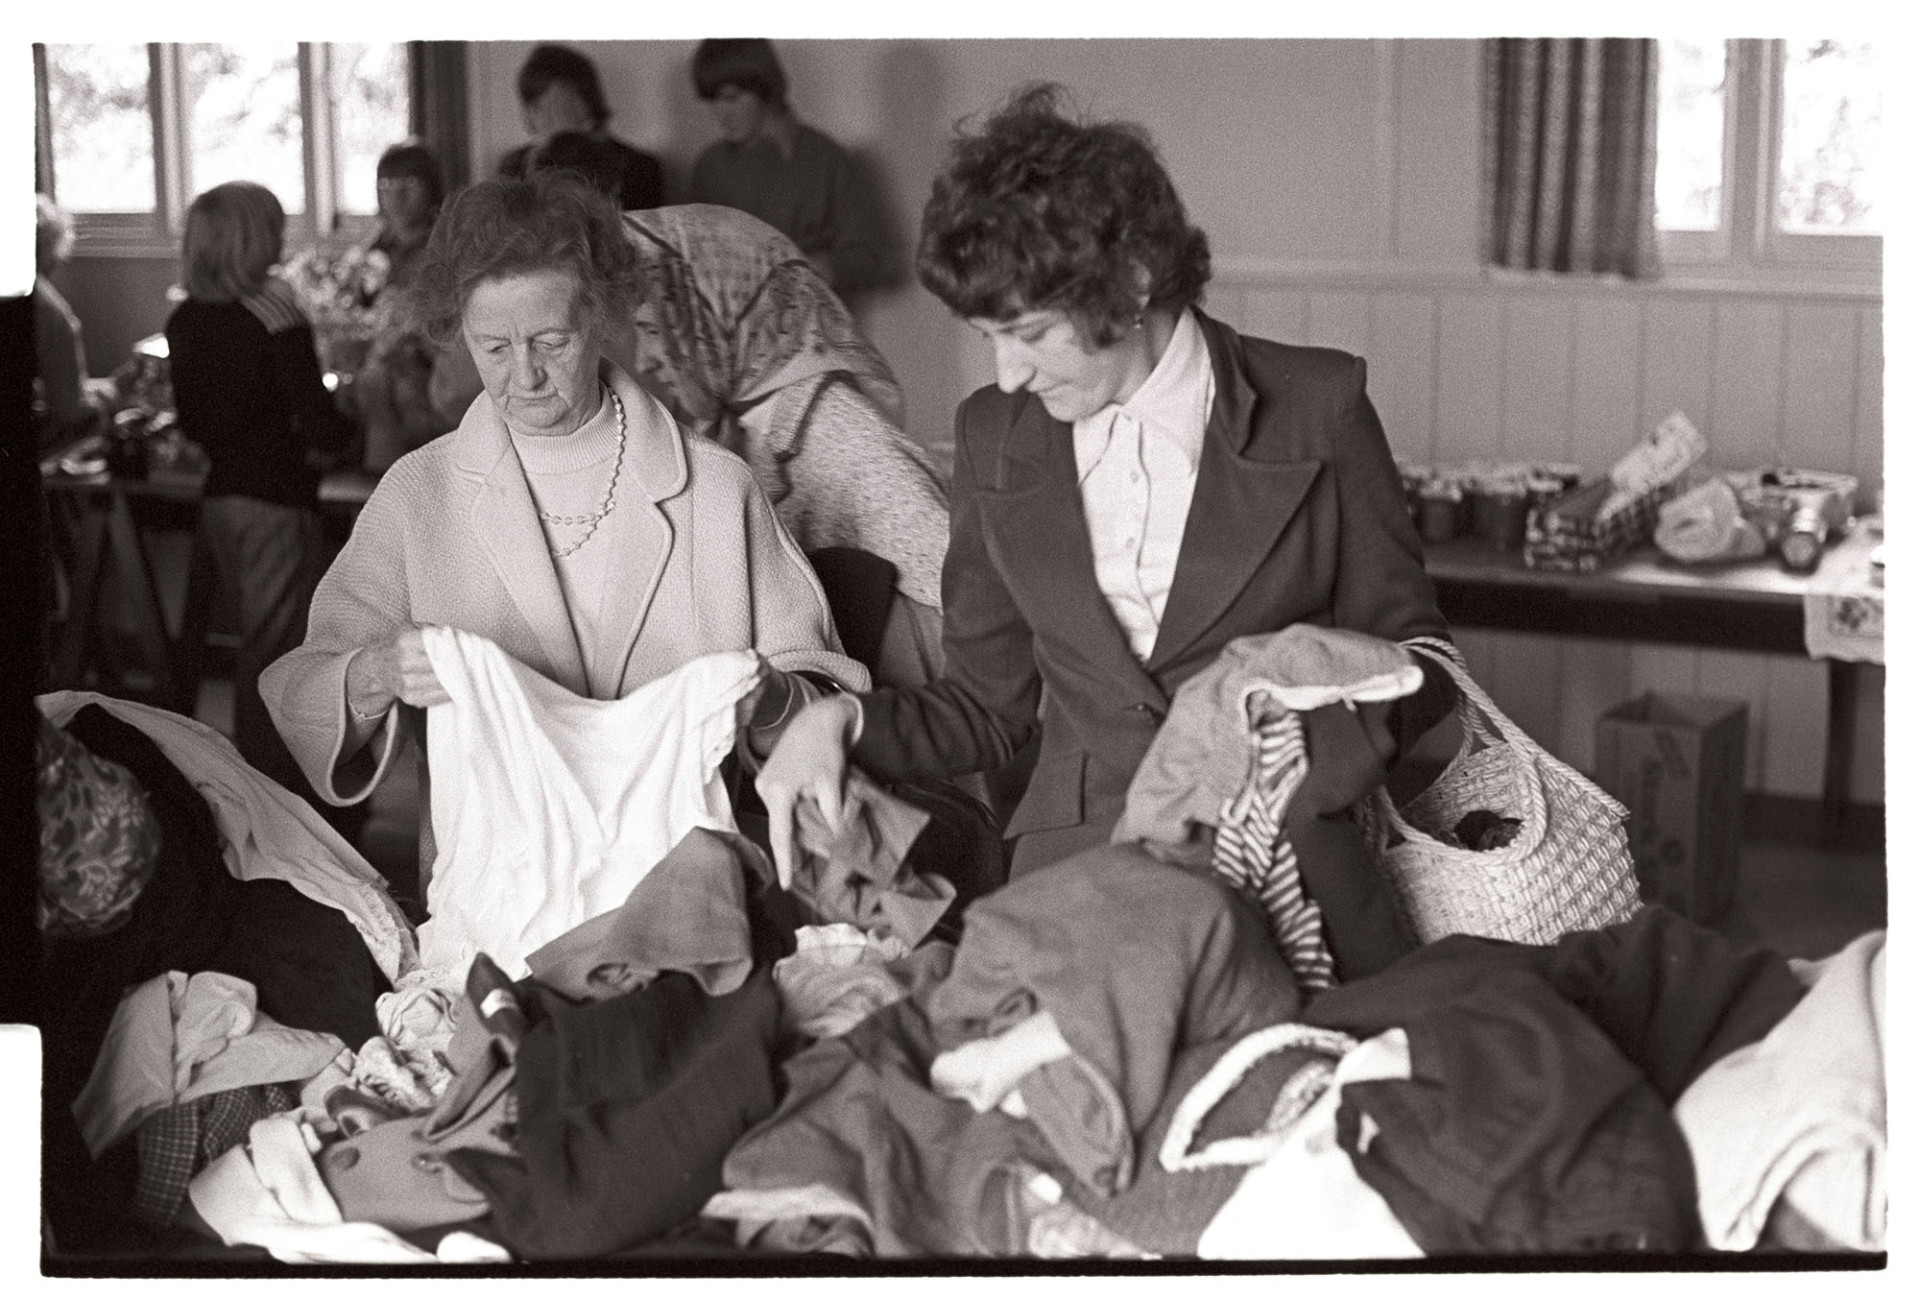 Women looking at clothes at jumble sale.
[Two women looking at clothes in a jumble sale at Harracott. Other stalls are visible in the background.]